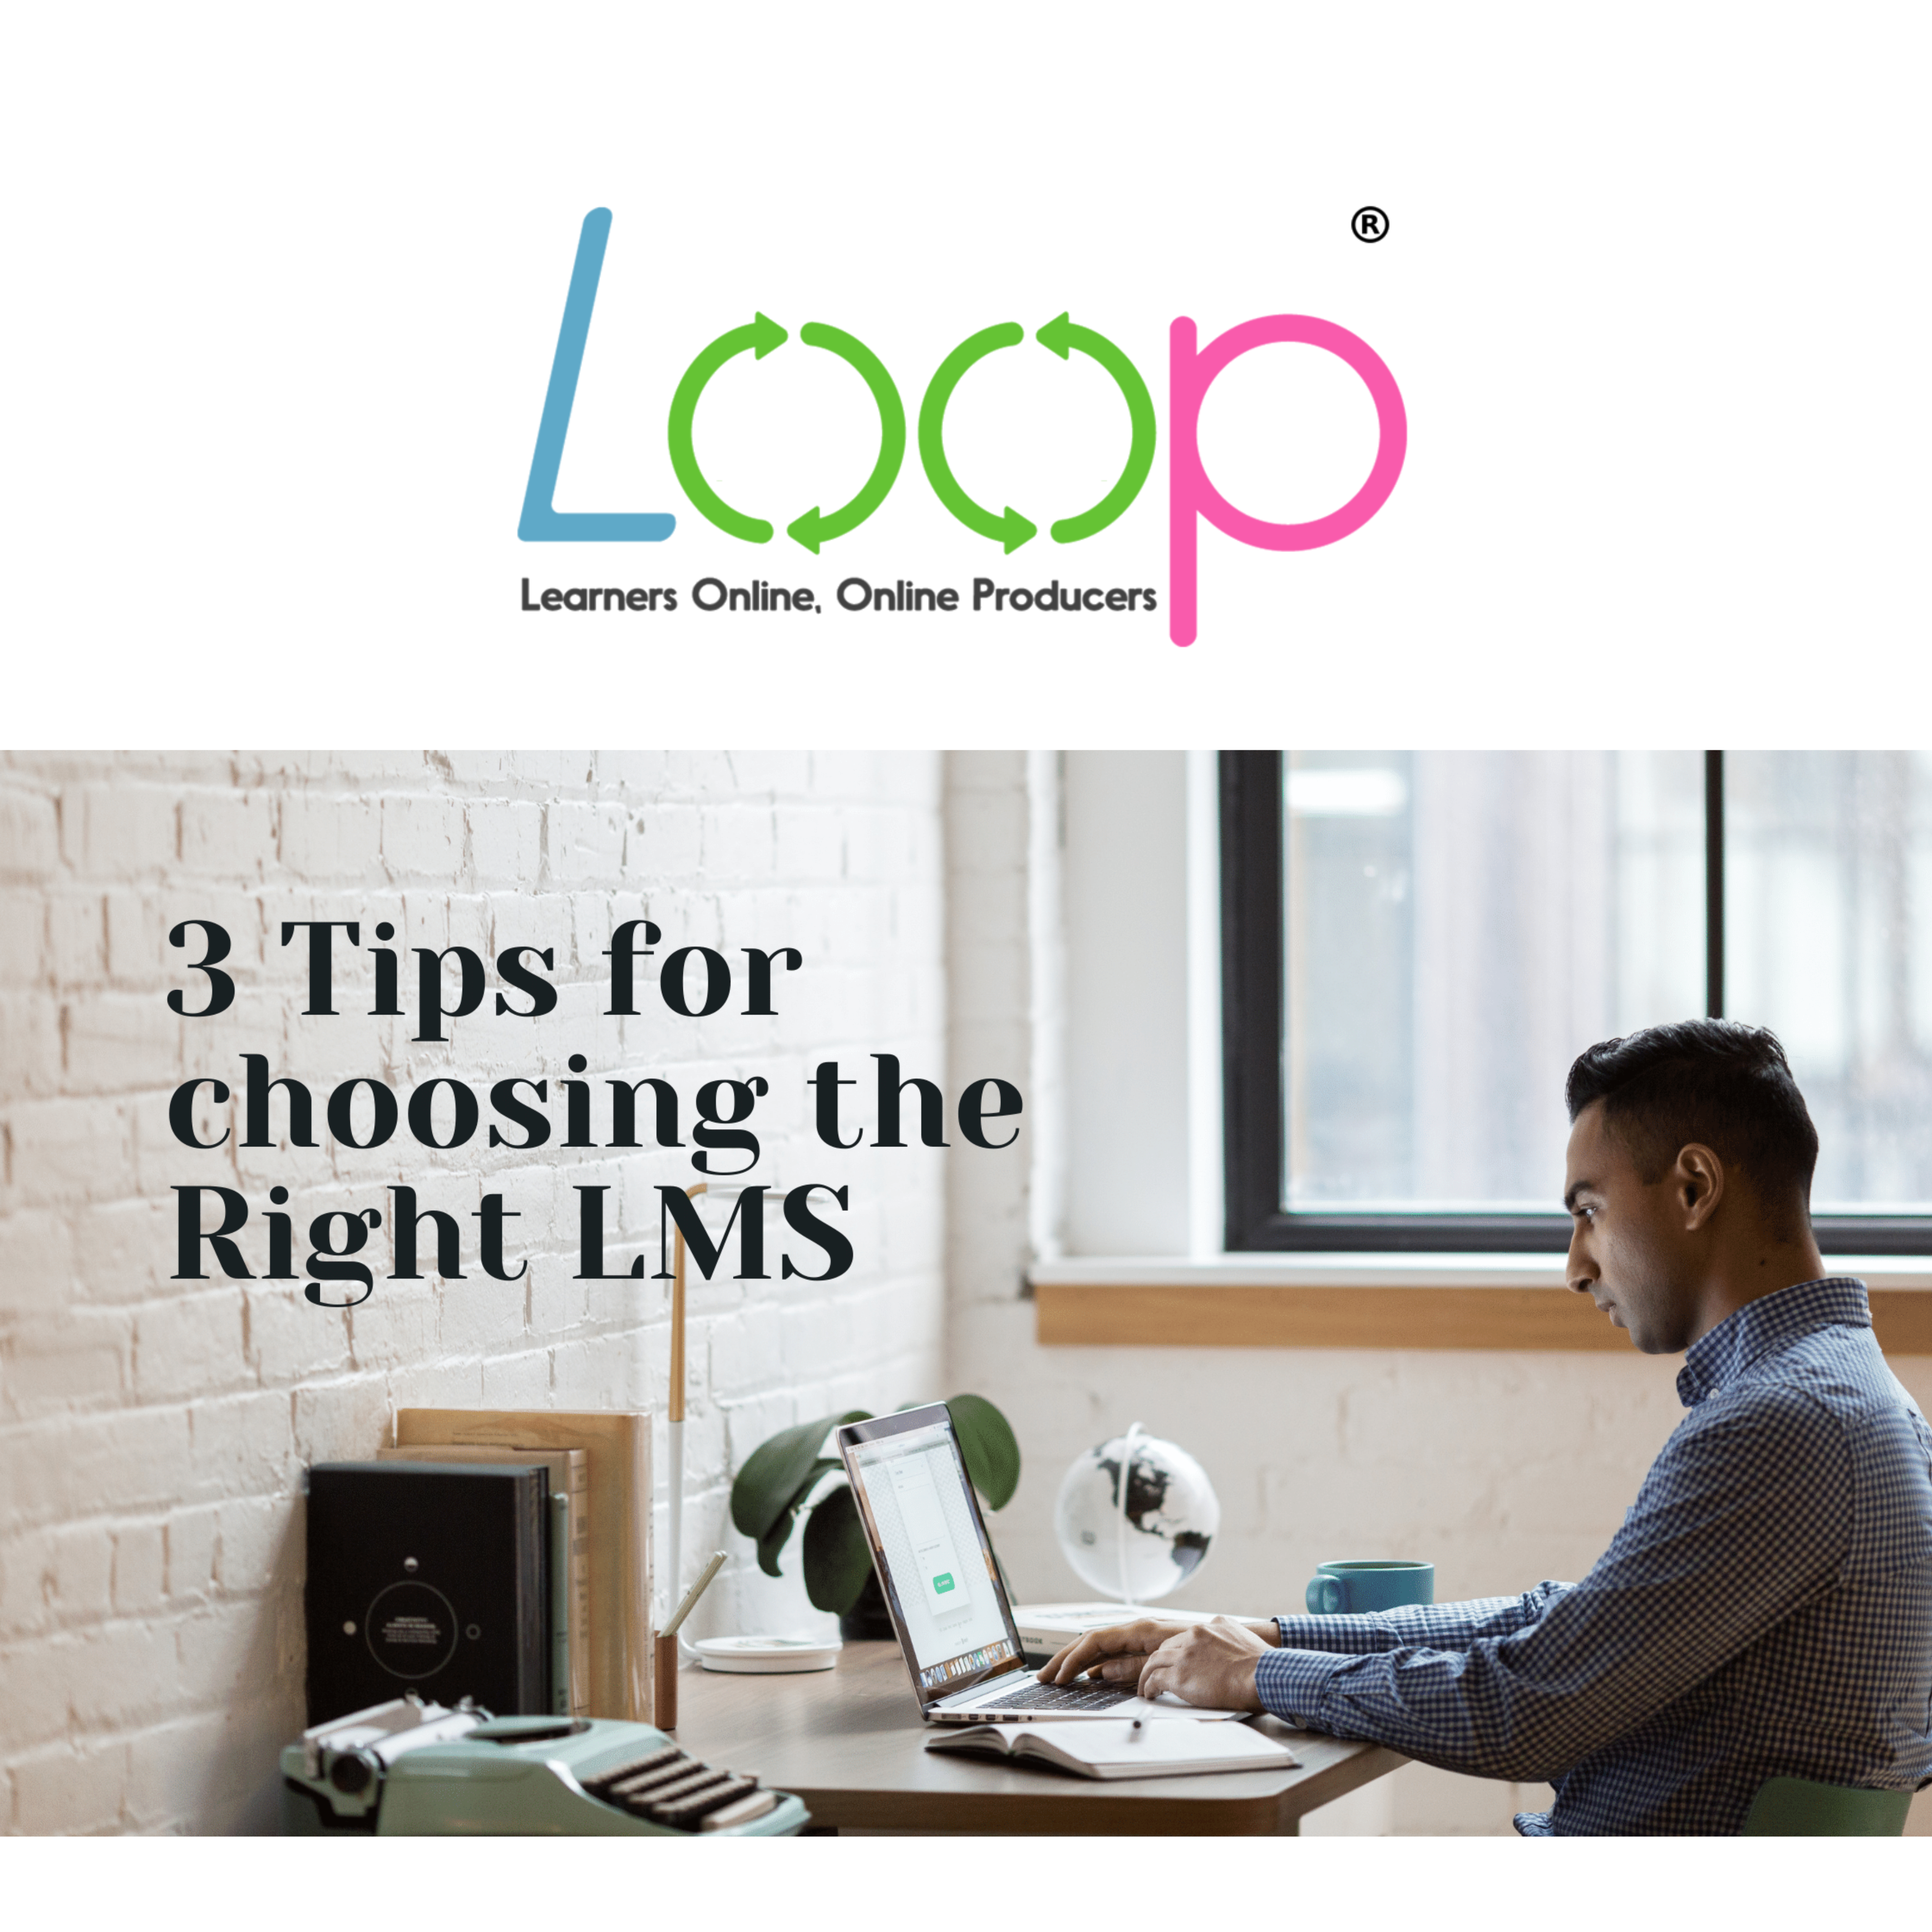 3 Tips for choosing the right LMS